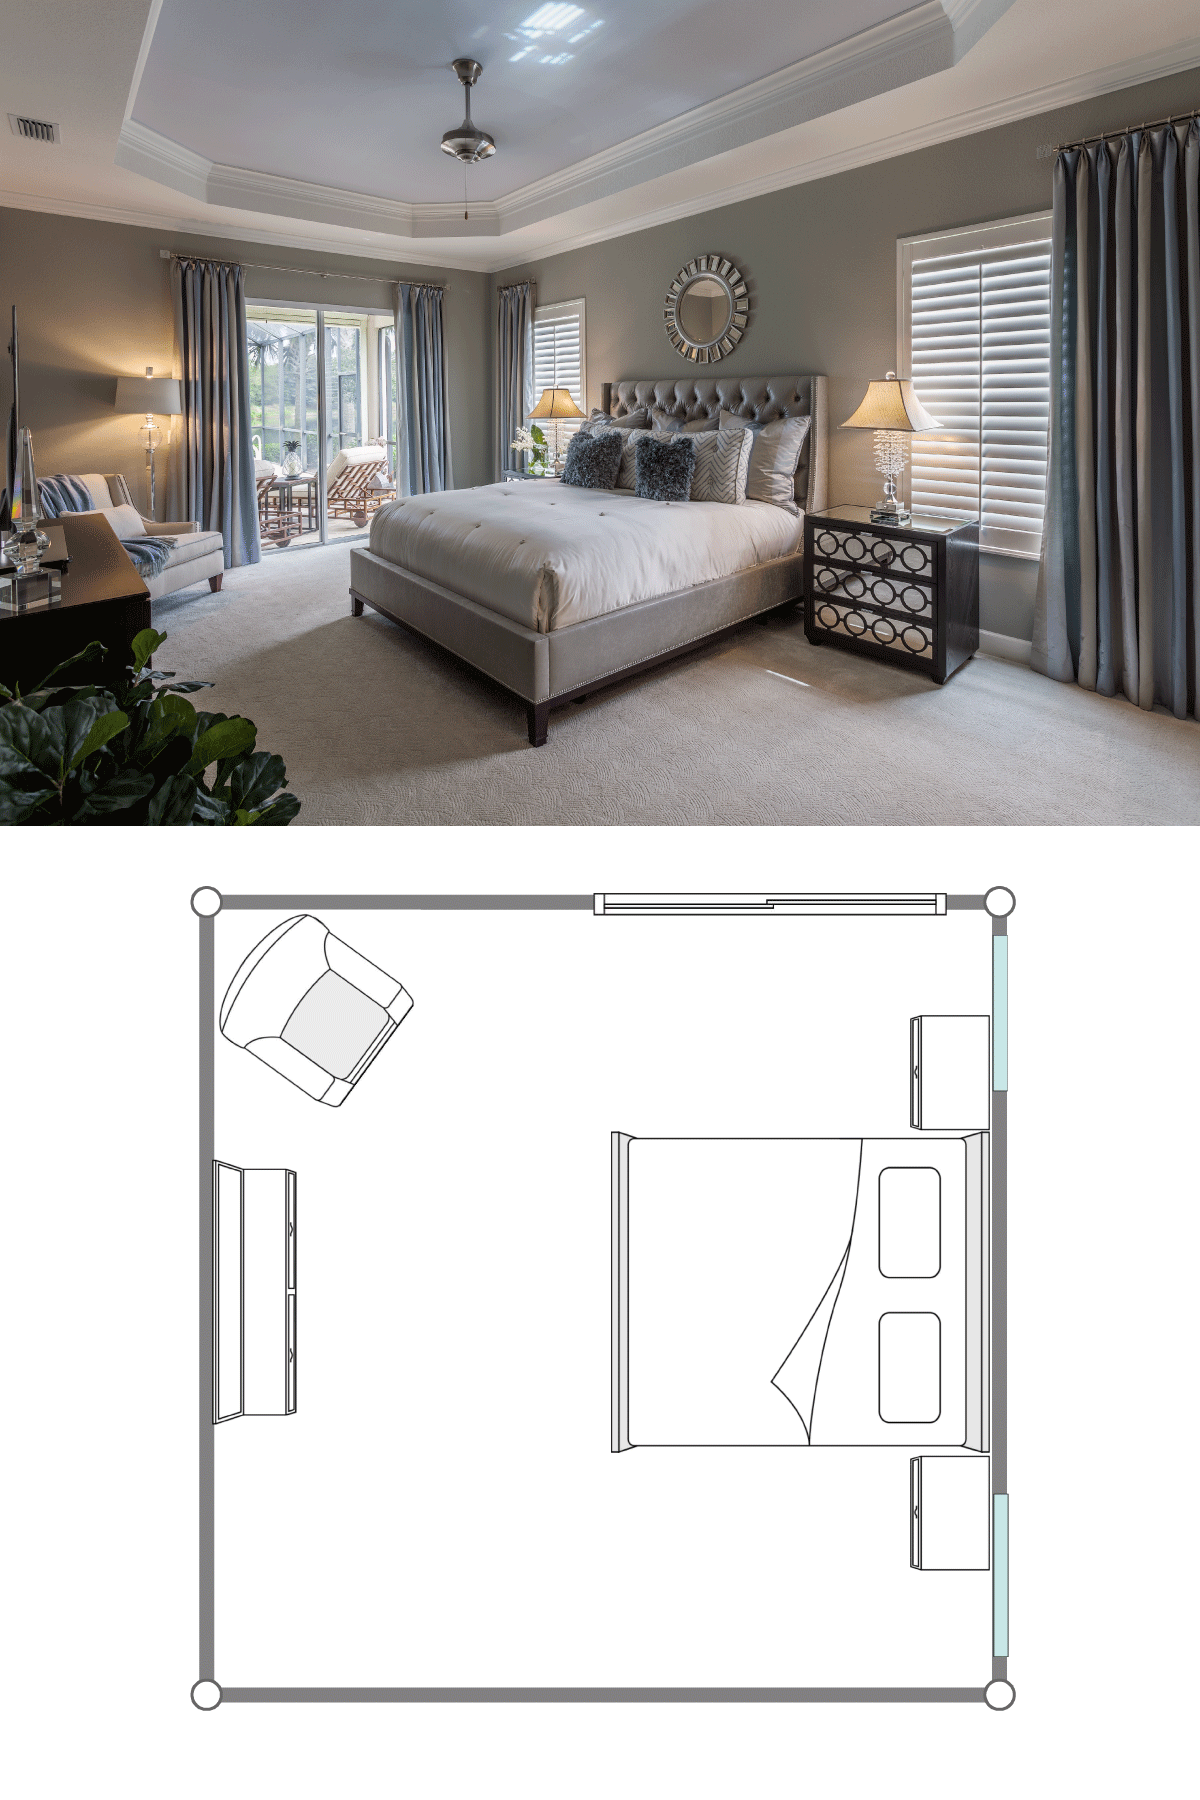 A large and luxurious modern bedroom with an expensive and comfortable king sized bed